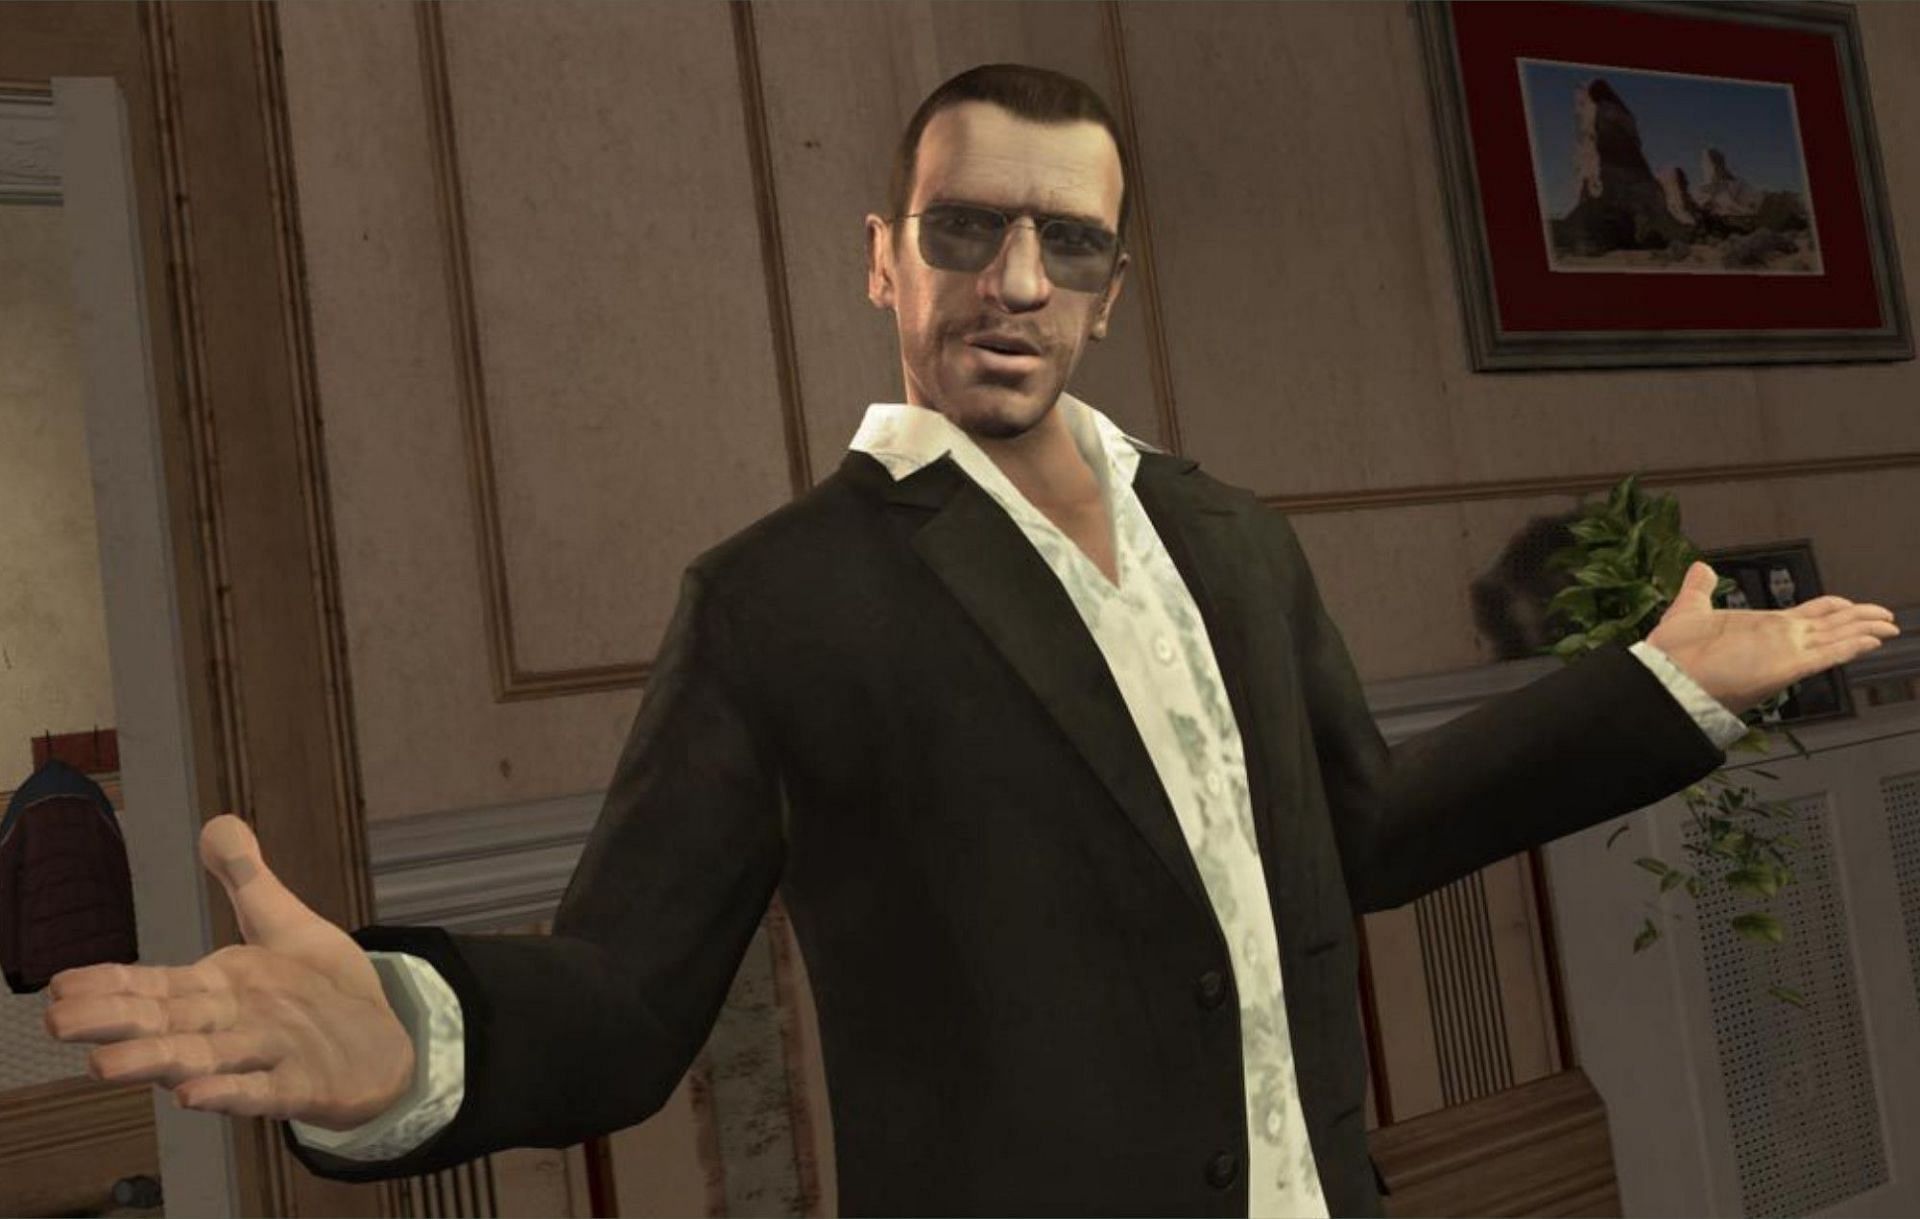 Fact: GTA 4 is the highest-rated GTA title and the third highest